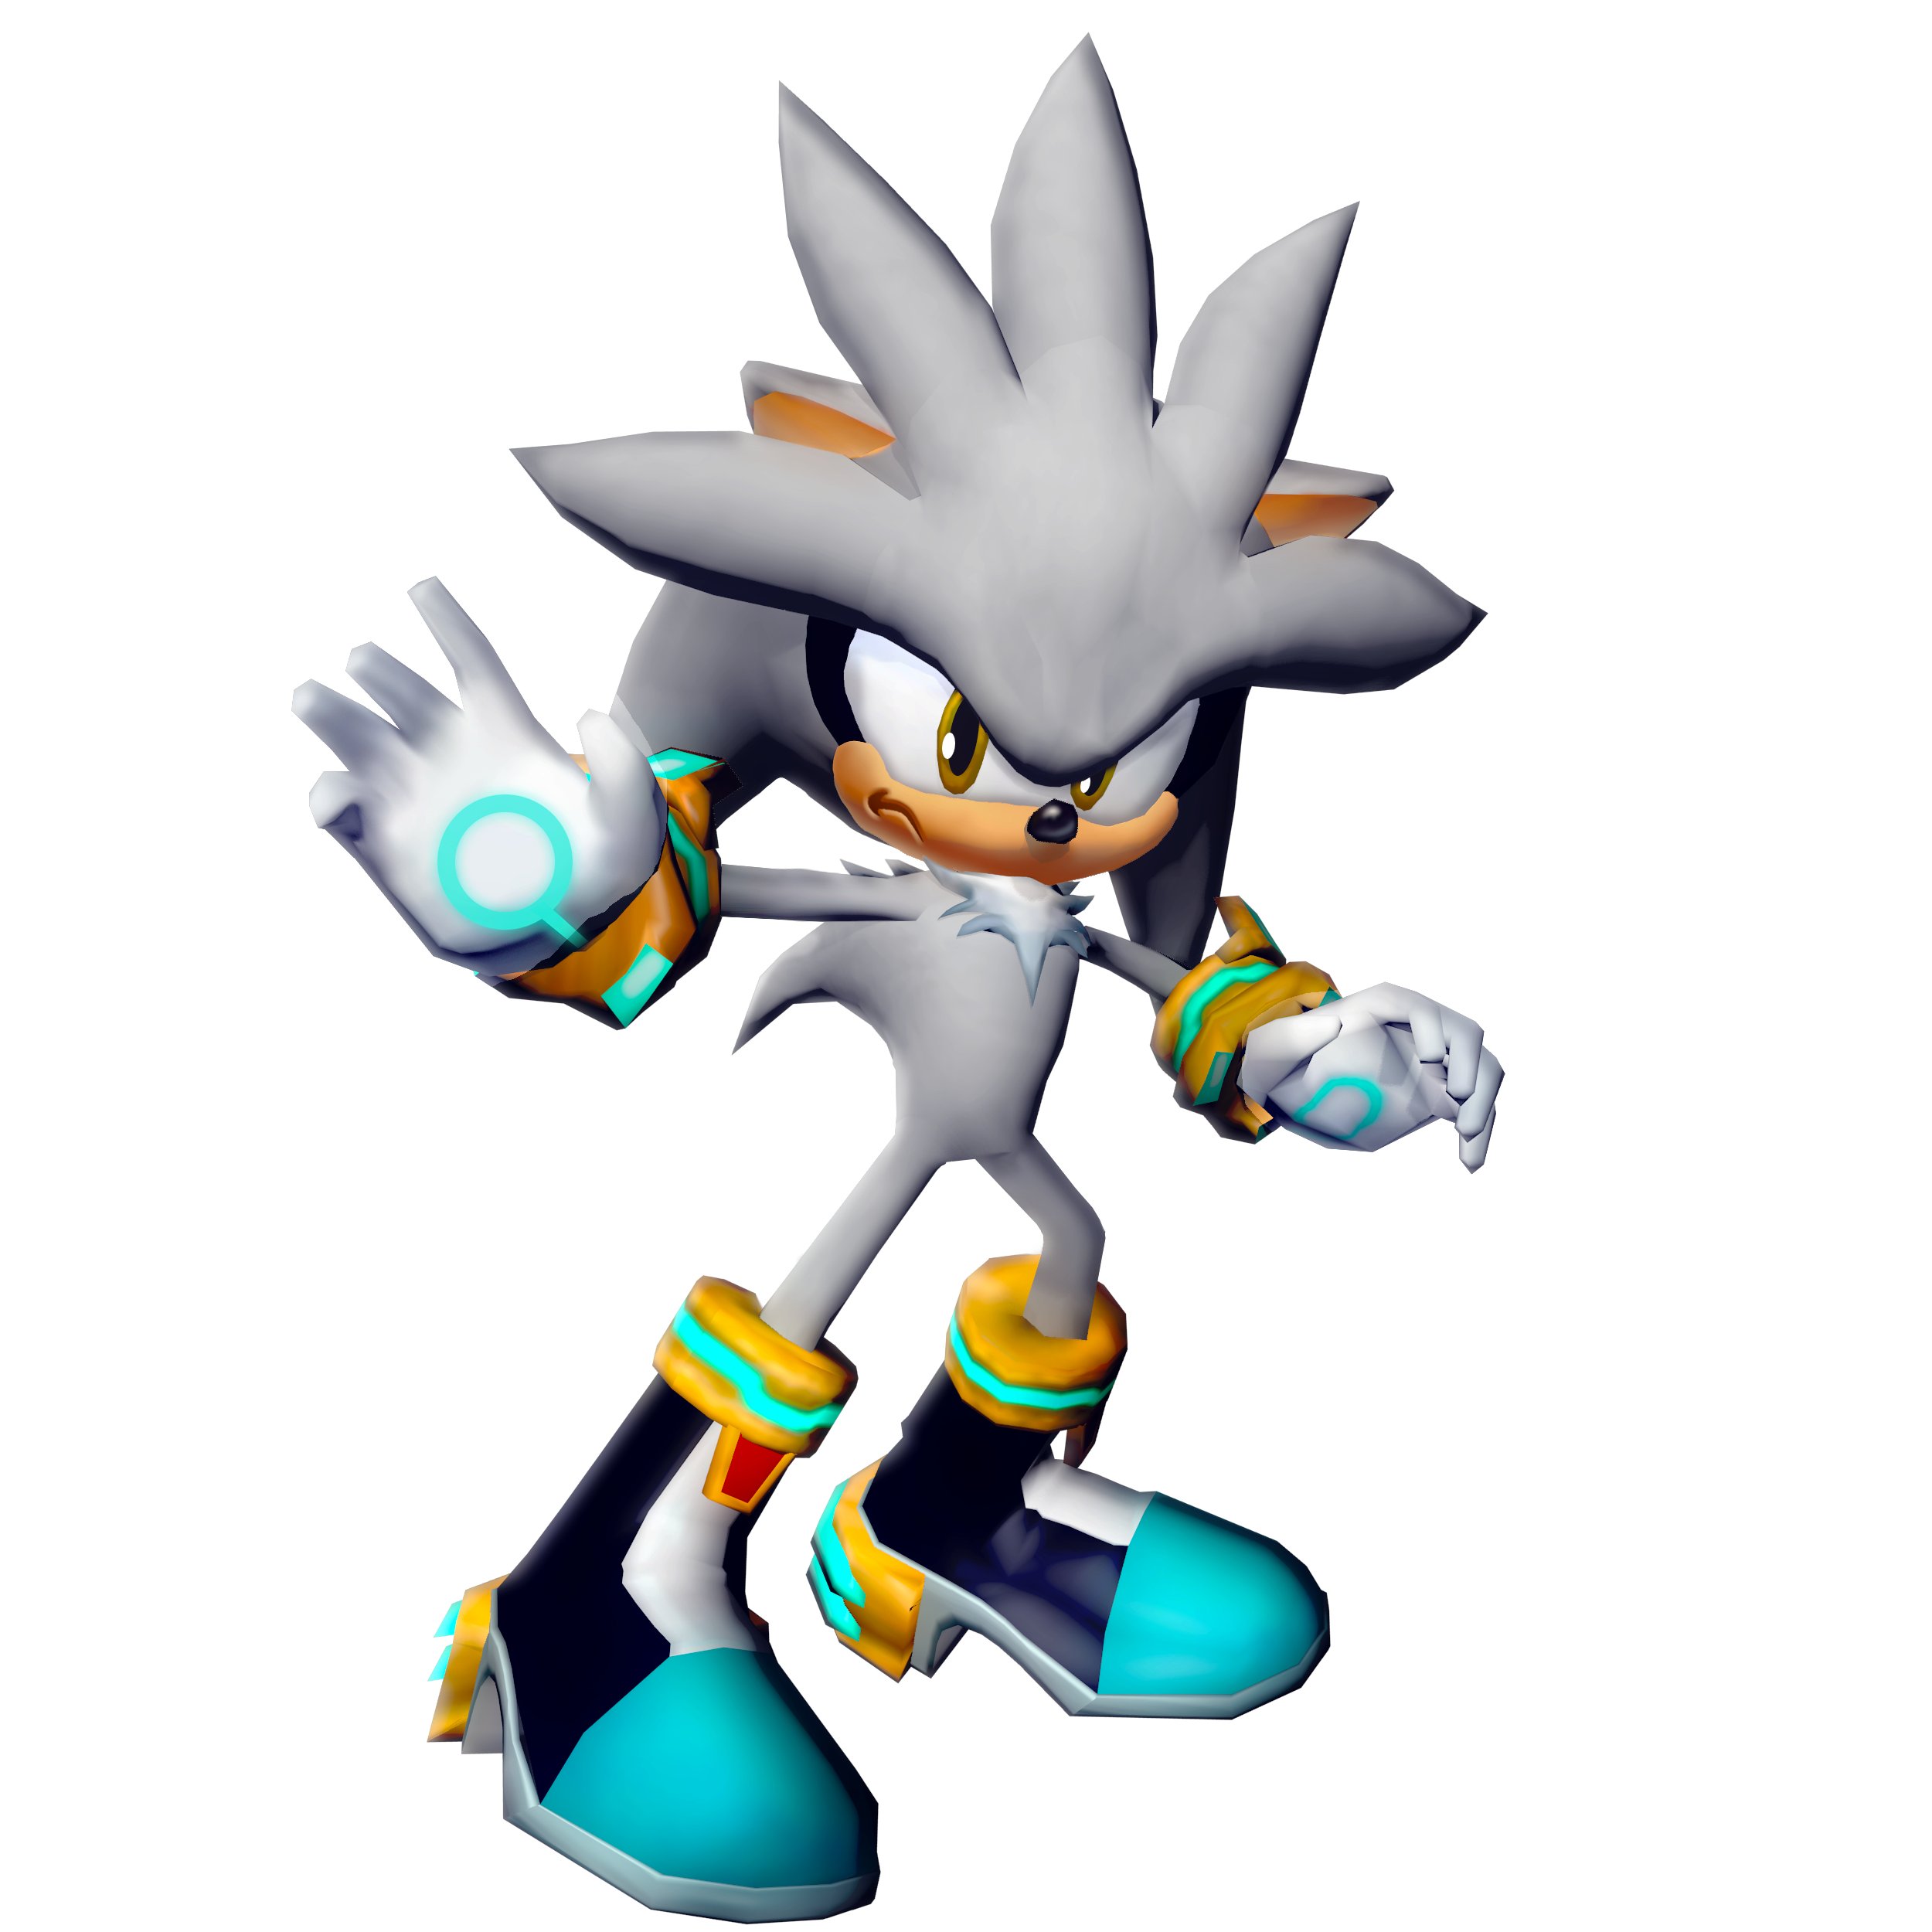 Nibroc.Rock on X: @LexsPeridot they do seem alike fitting, given they are  both a fusion of sonic and shadow  / X